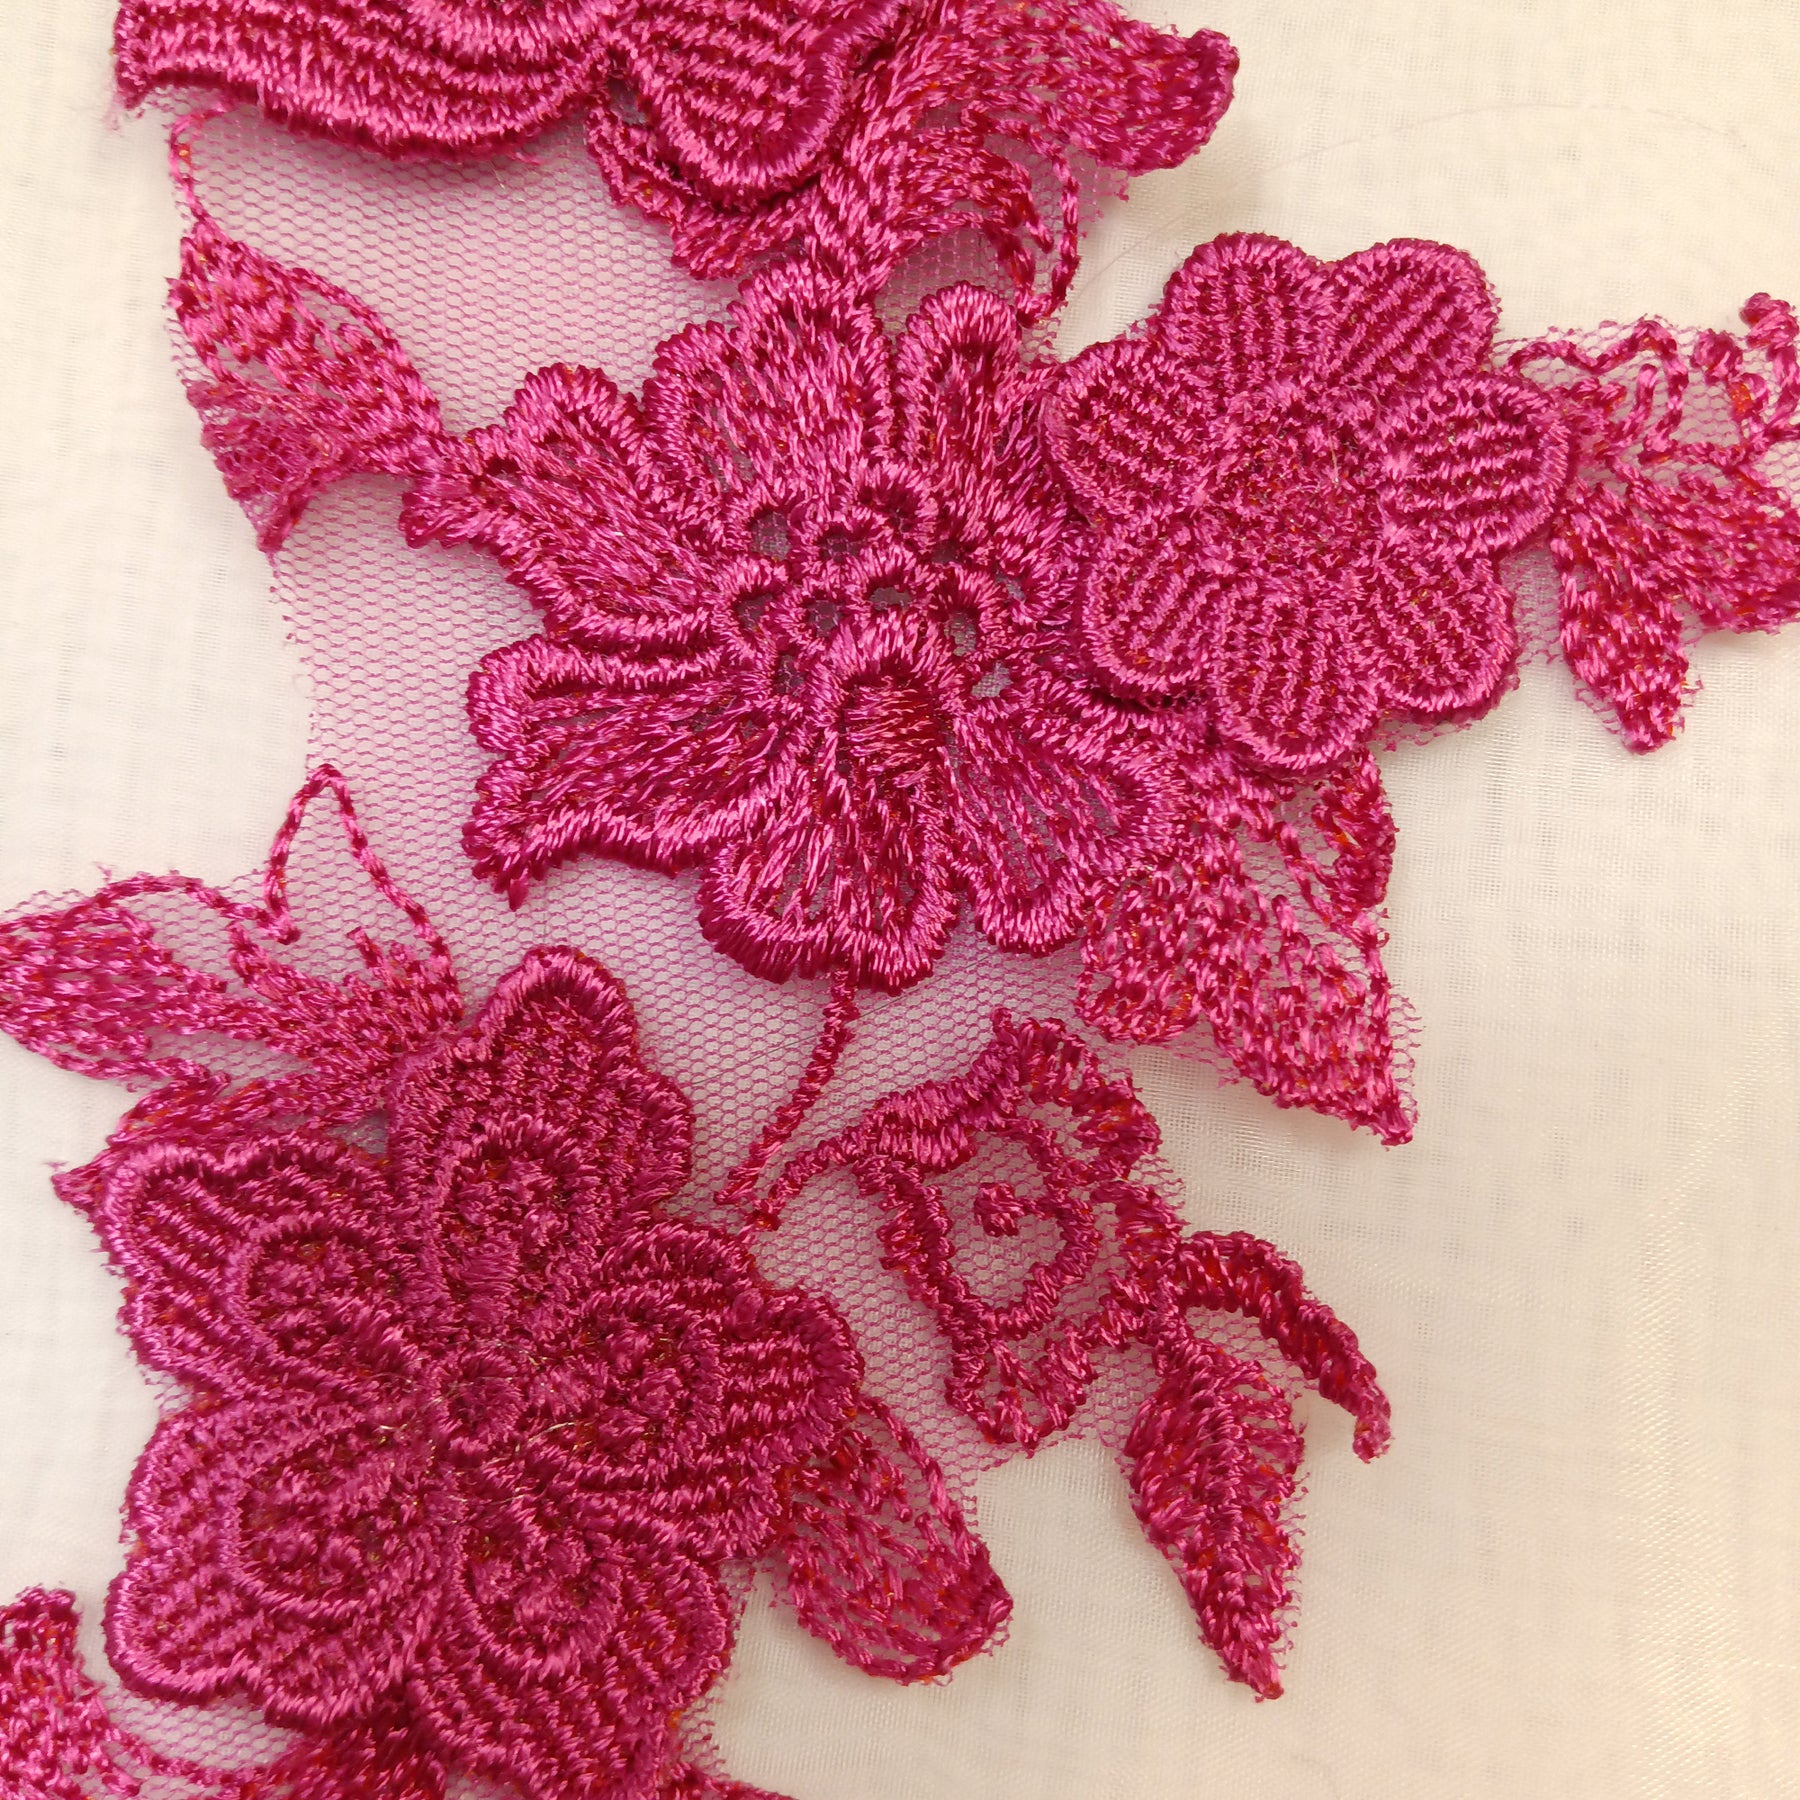 3D Floral Lace Applique Embroidered on 100% Poly. Net Mesh | Lace USA